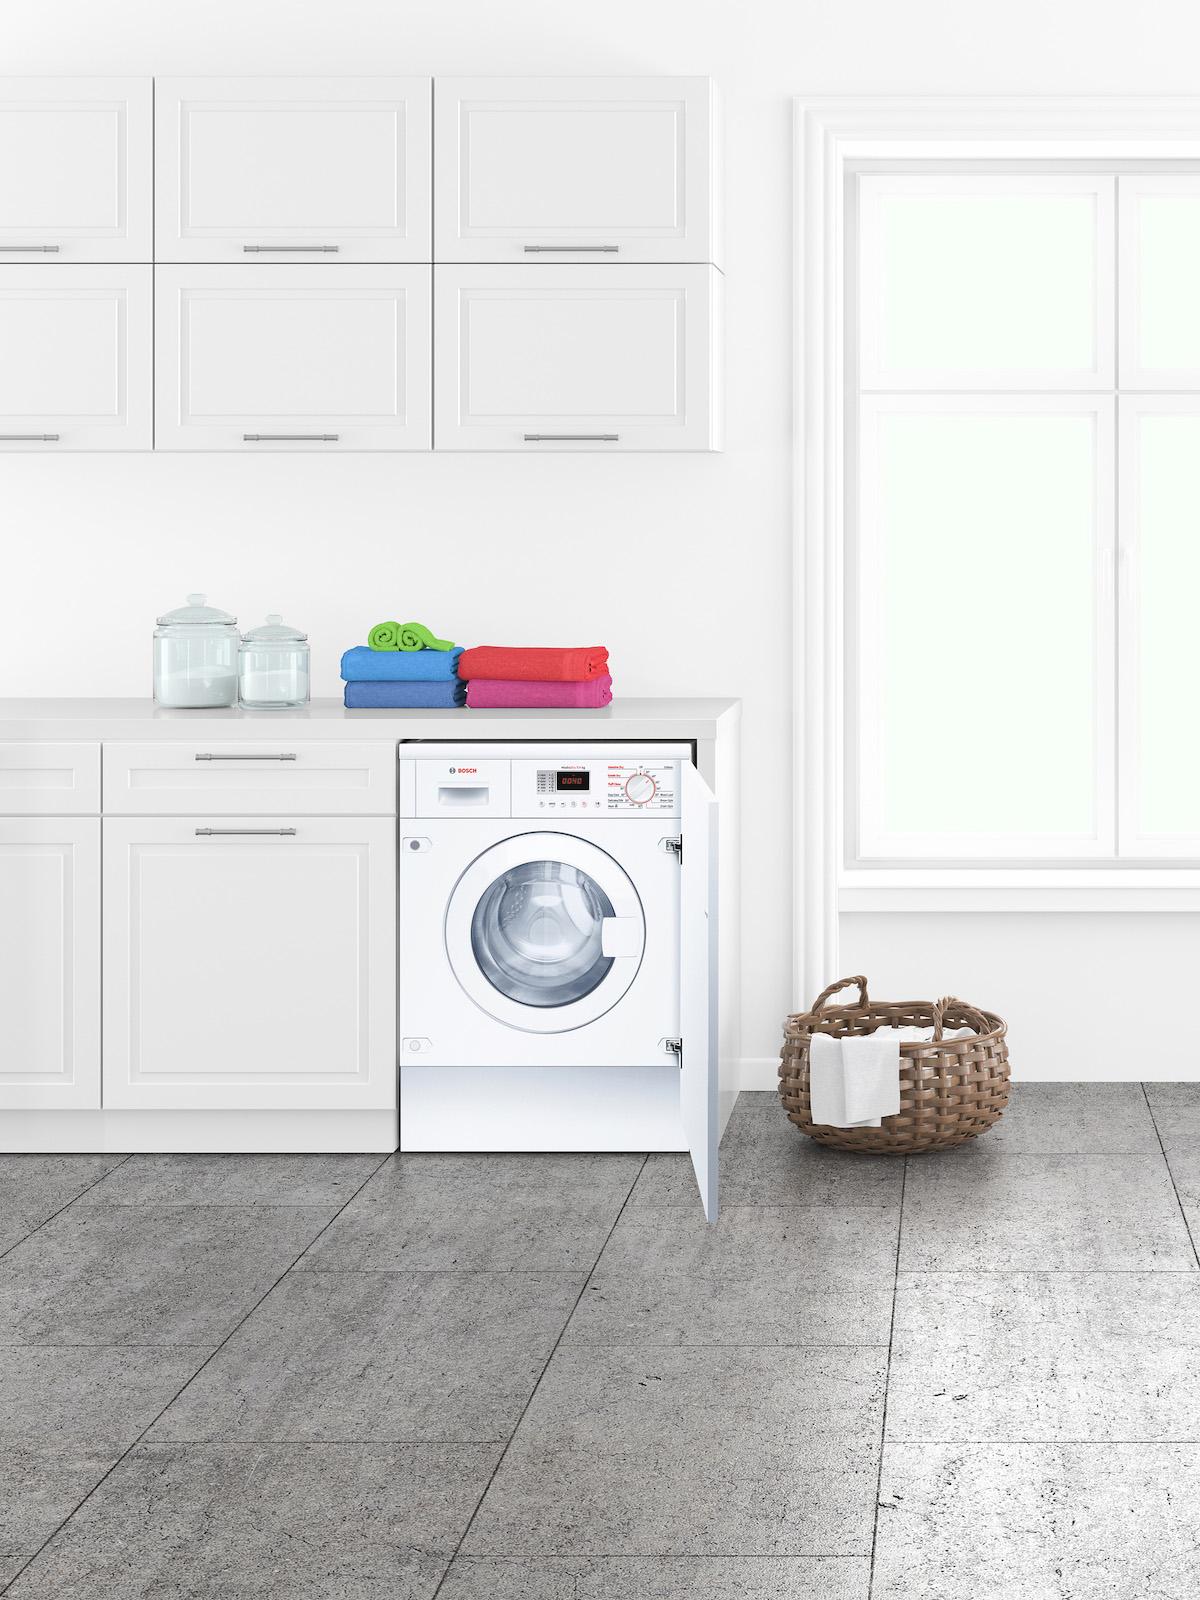 Bosch Simplifies The Laundry Process